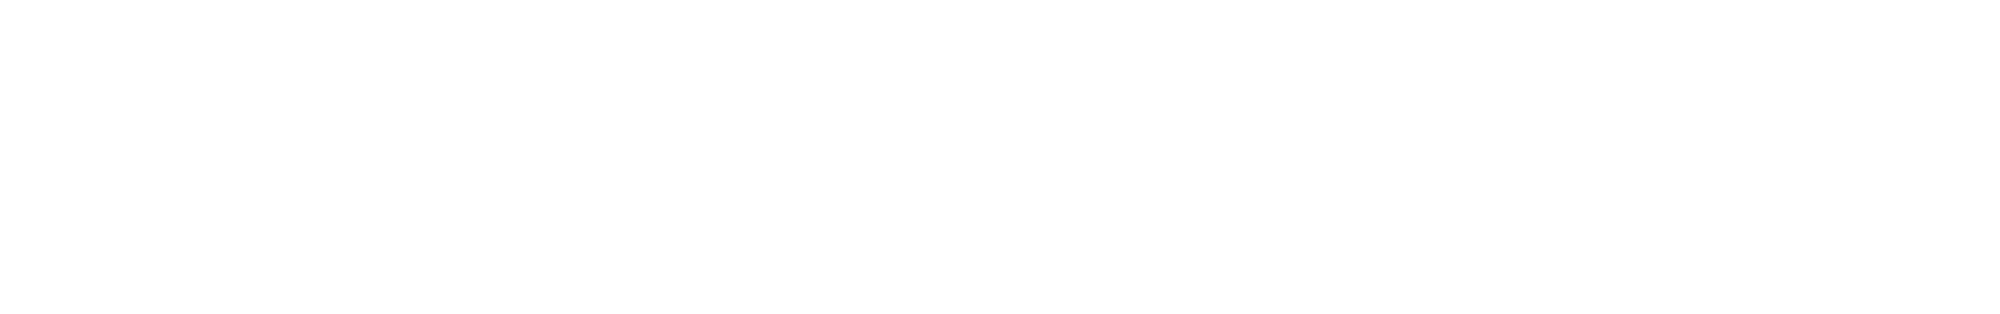 With support from the Province of British Columbia